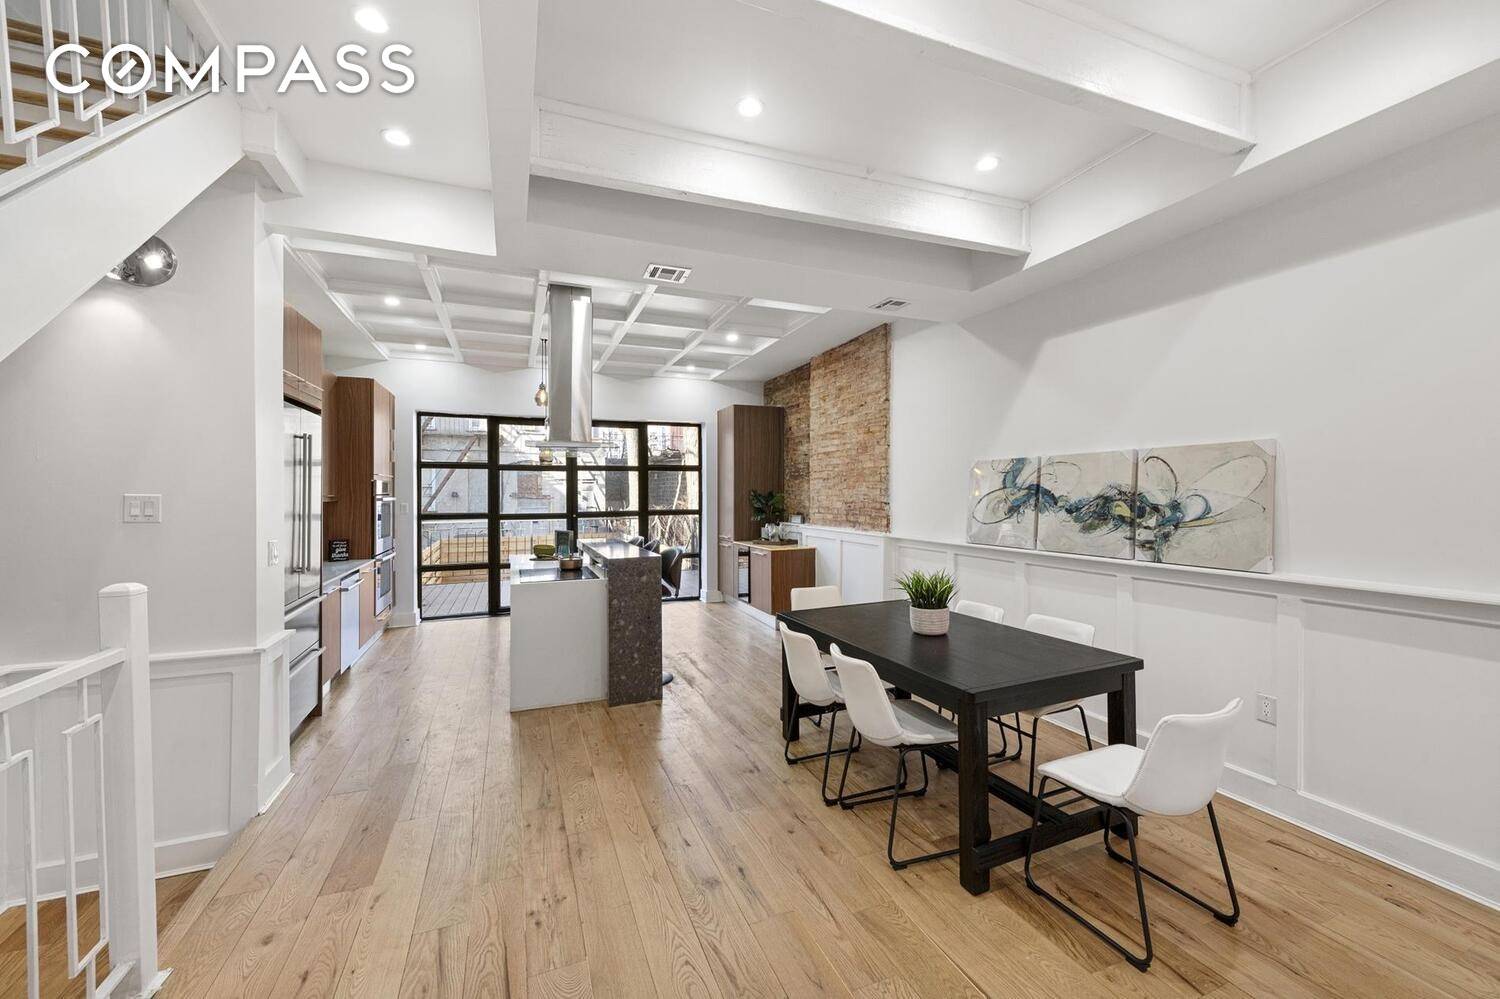 Located just a block from beautiful Prospect Park, this gut renovated townhouse, features a stunning combination of contemporary city sleek and classic Brooklyn charm.